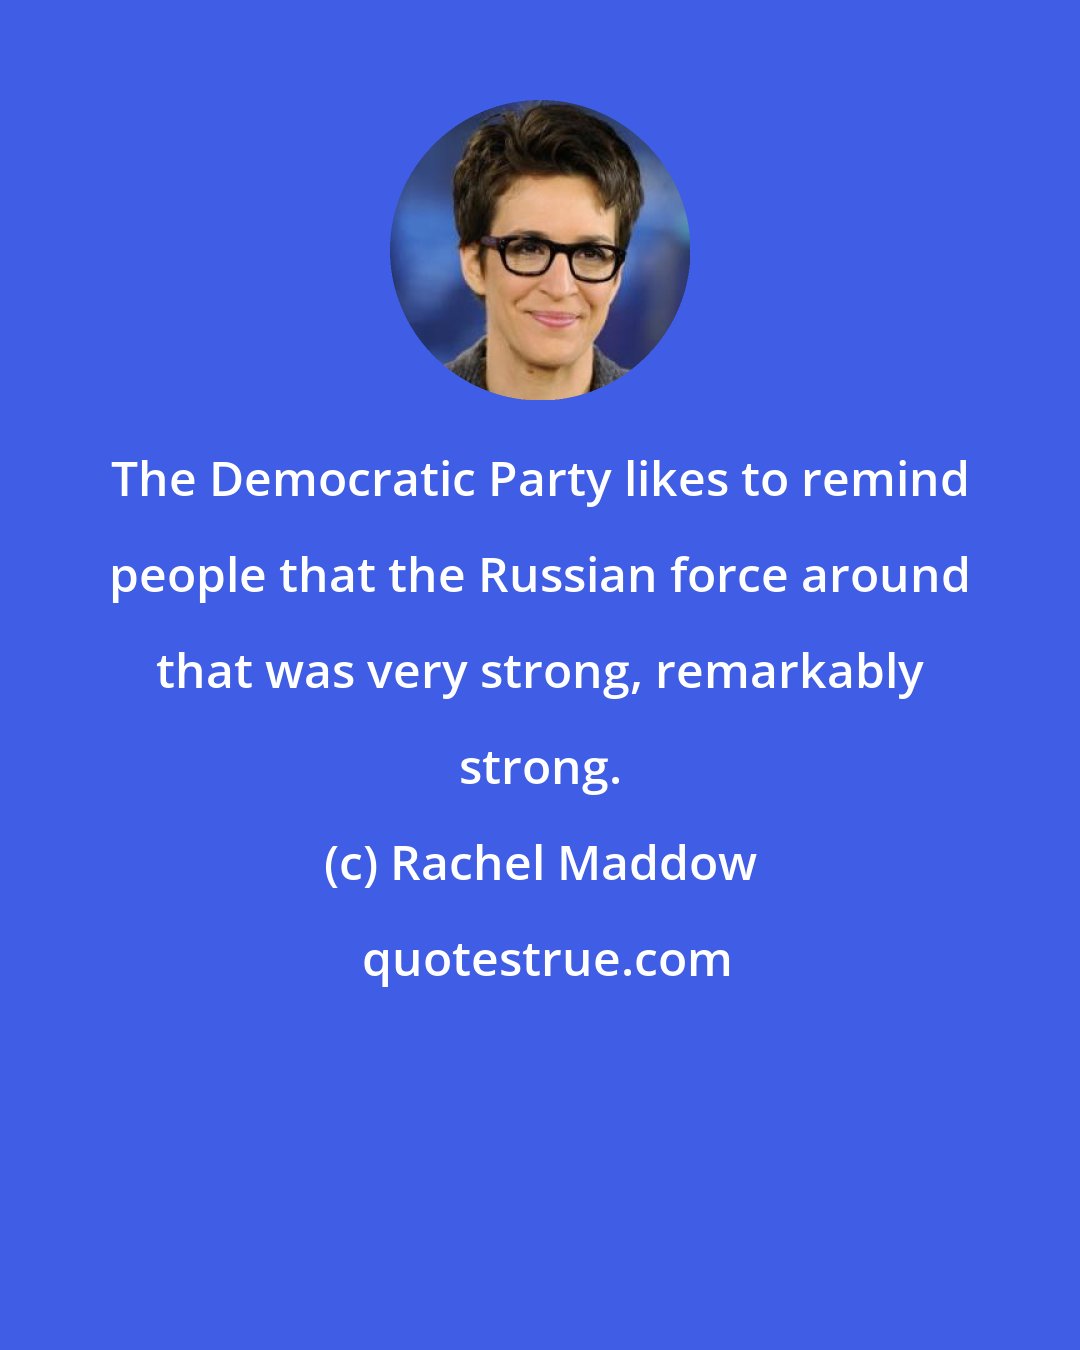 Rachel Maddow: The Democratic Party likes to remind people that the Russian force around that was very strong, remarkably strong.